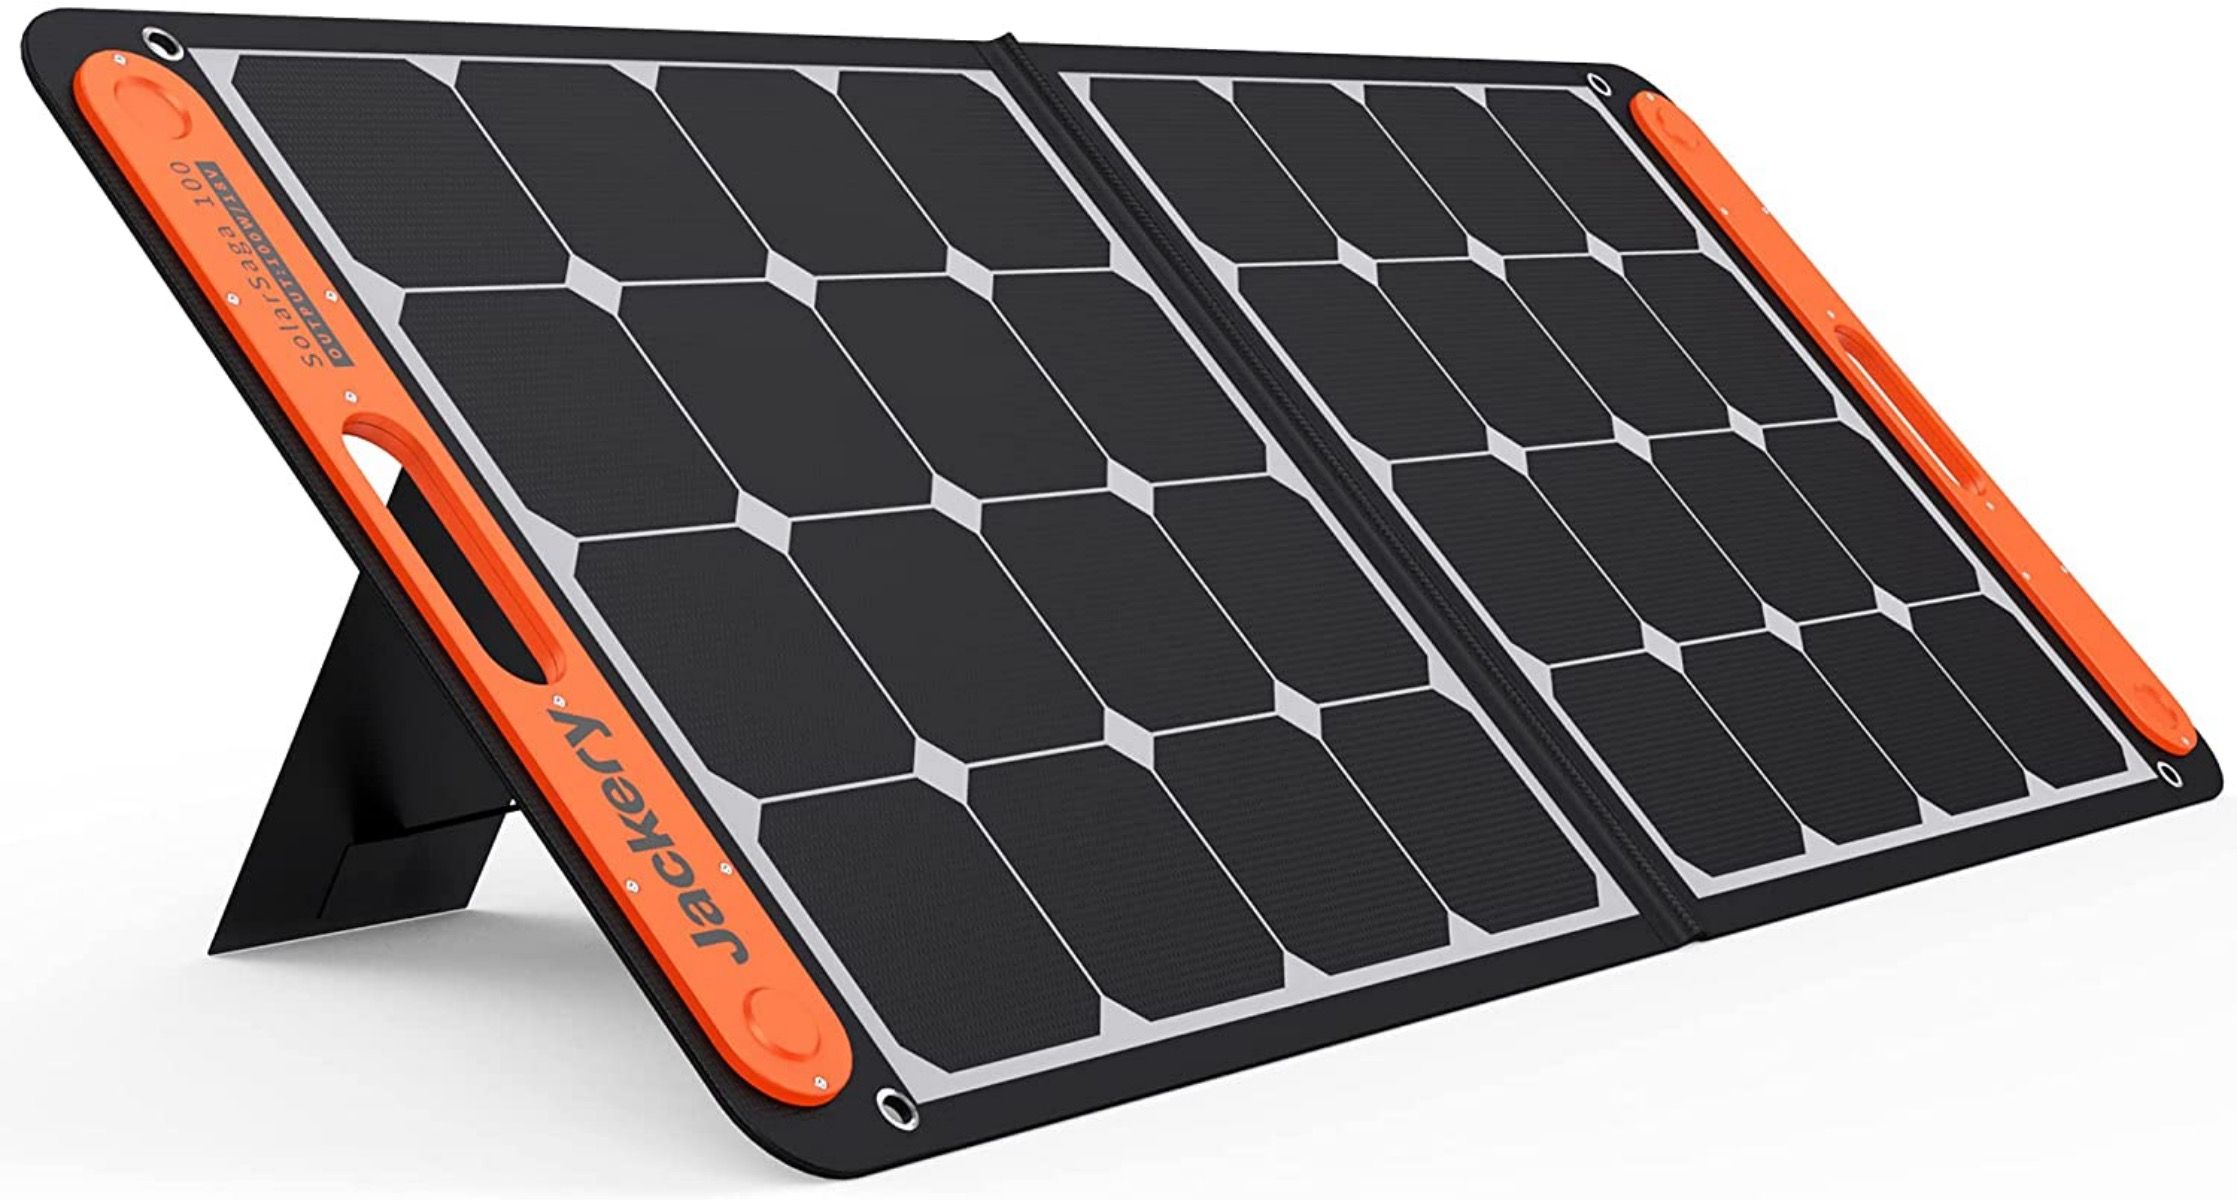 Jackery SolarSaga 100W standing on its stand